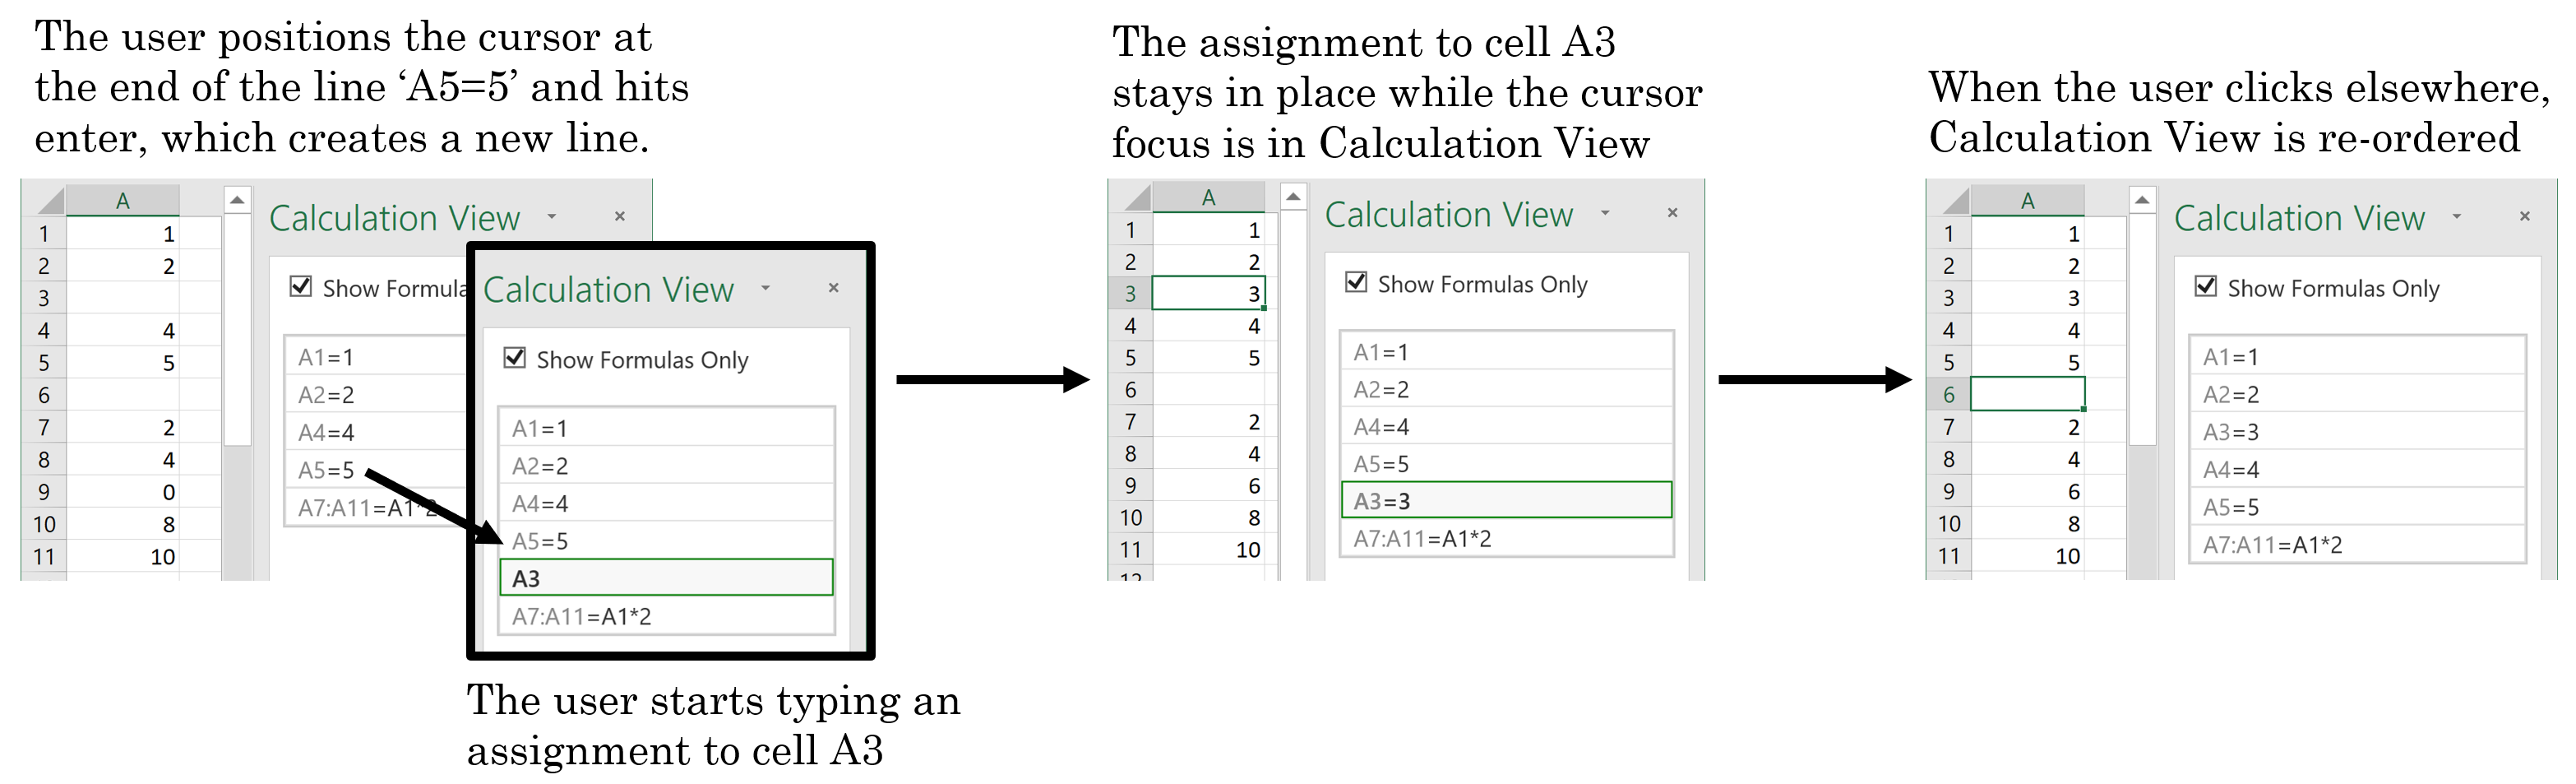 The user can create assignments at any position in CV. When CV loses focus, assignments are re-ordered according to their spatial ordering.